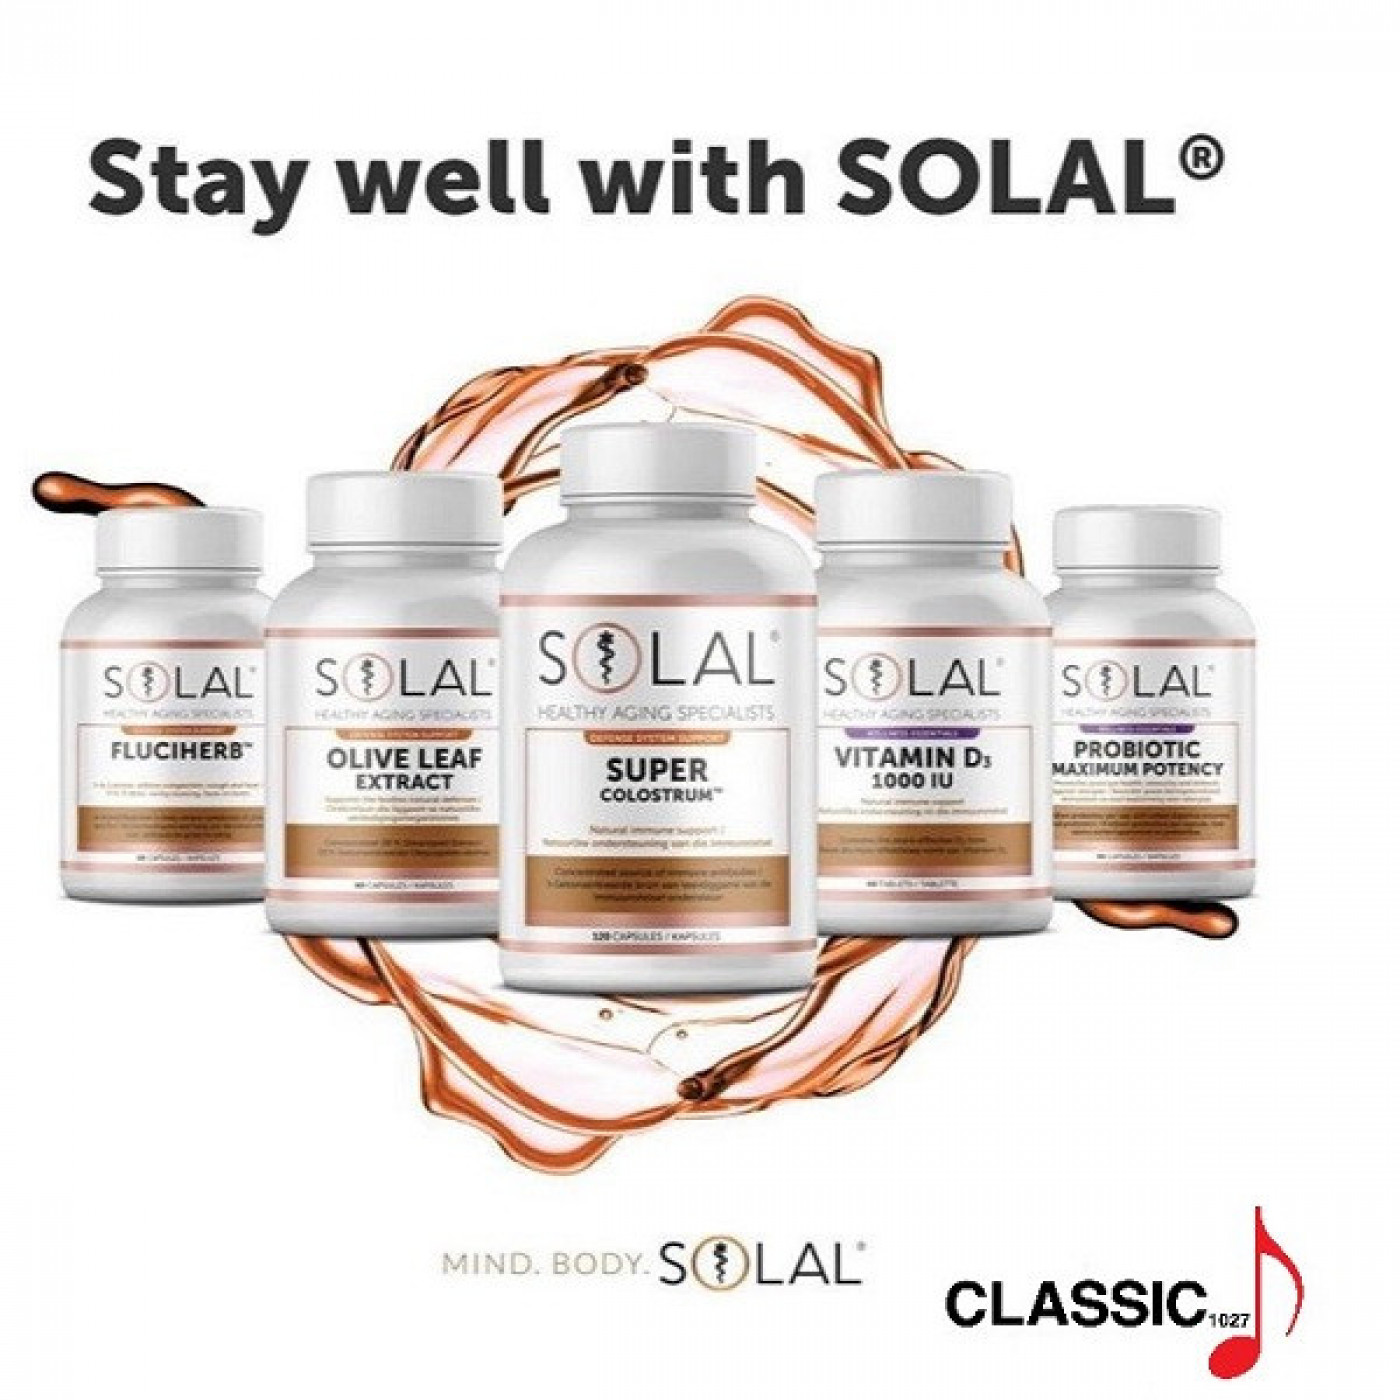 Stay Well with Solal - Reducing Risks